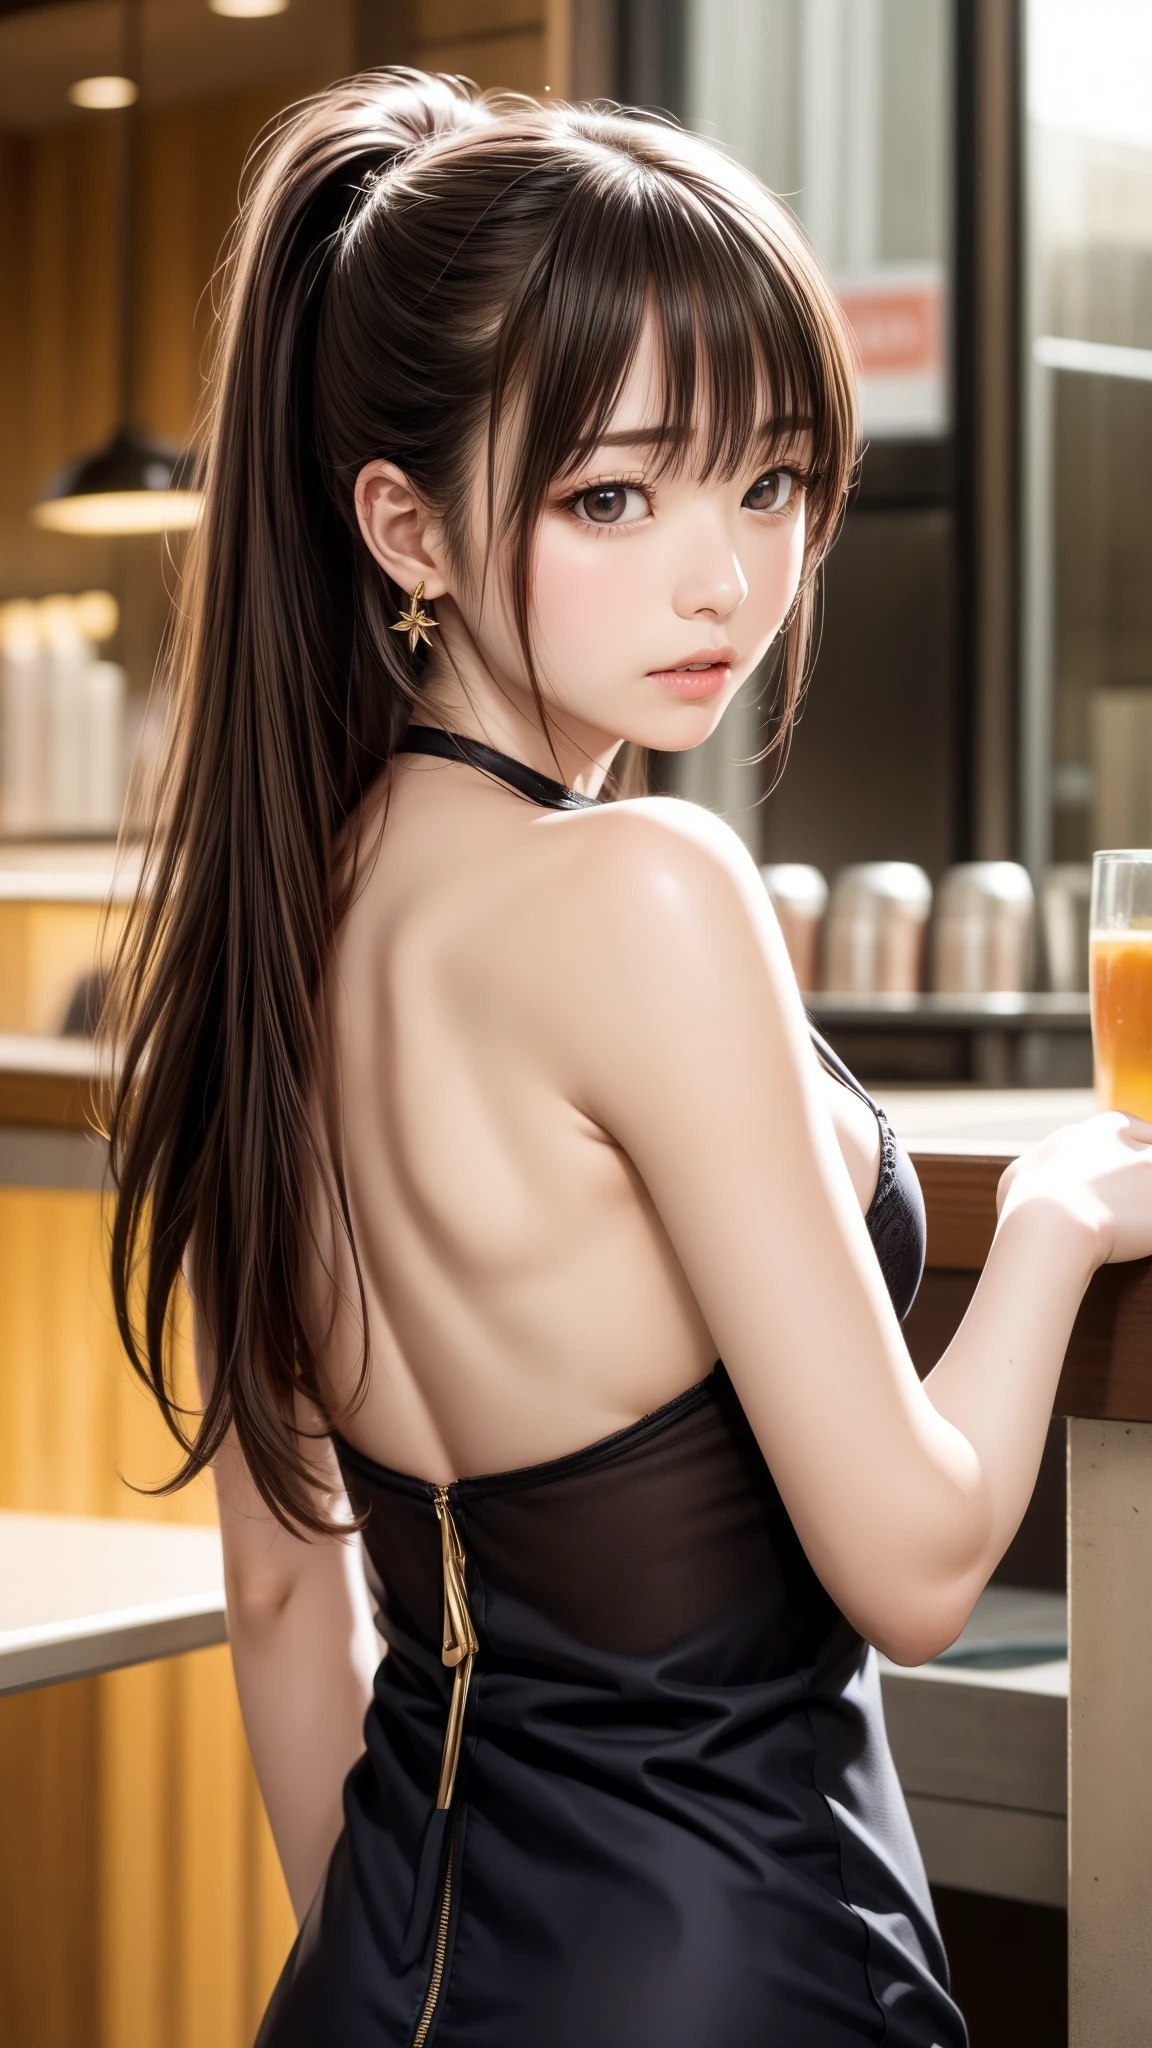 8K quality、High resolution、Realistic skin texture、High resolutionの瞳、Seated man、A female cafe owner embraced by a man、Brown long hair、、Ring piercing of the earlobe、A neat camisole、Dignified face、thin、Model Body Type、Ripe body、Neat 30 year old woman、Off the shoulder、Shooting from behind、Up ponytail、Naked realistic female genitalia